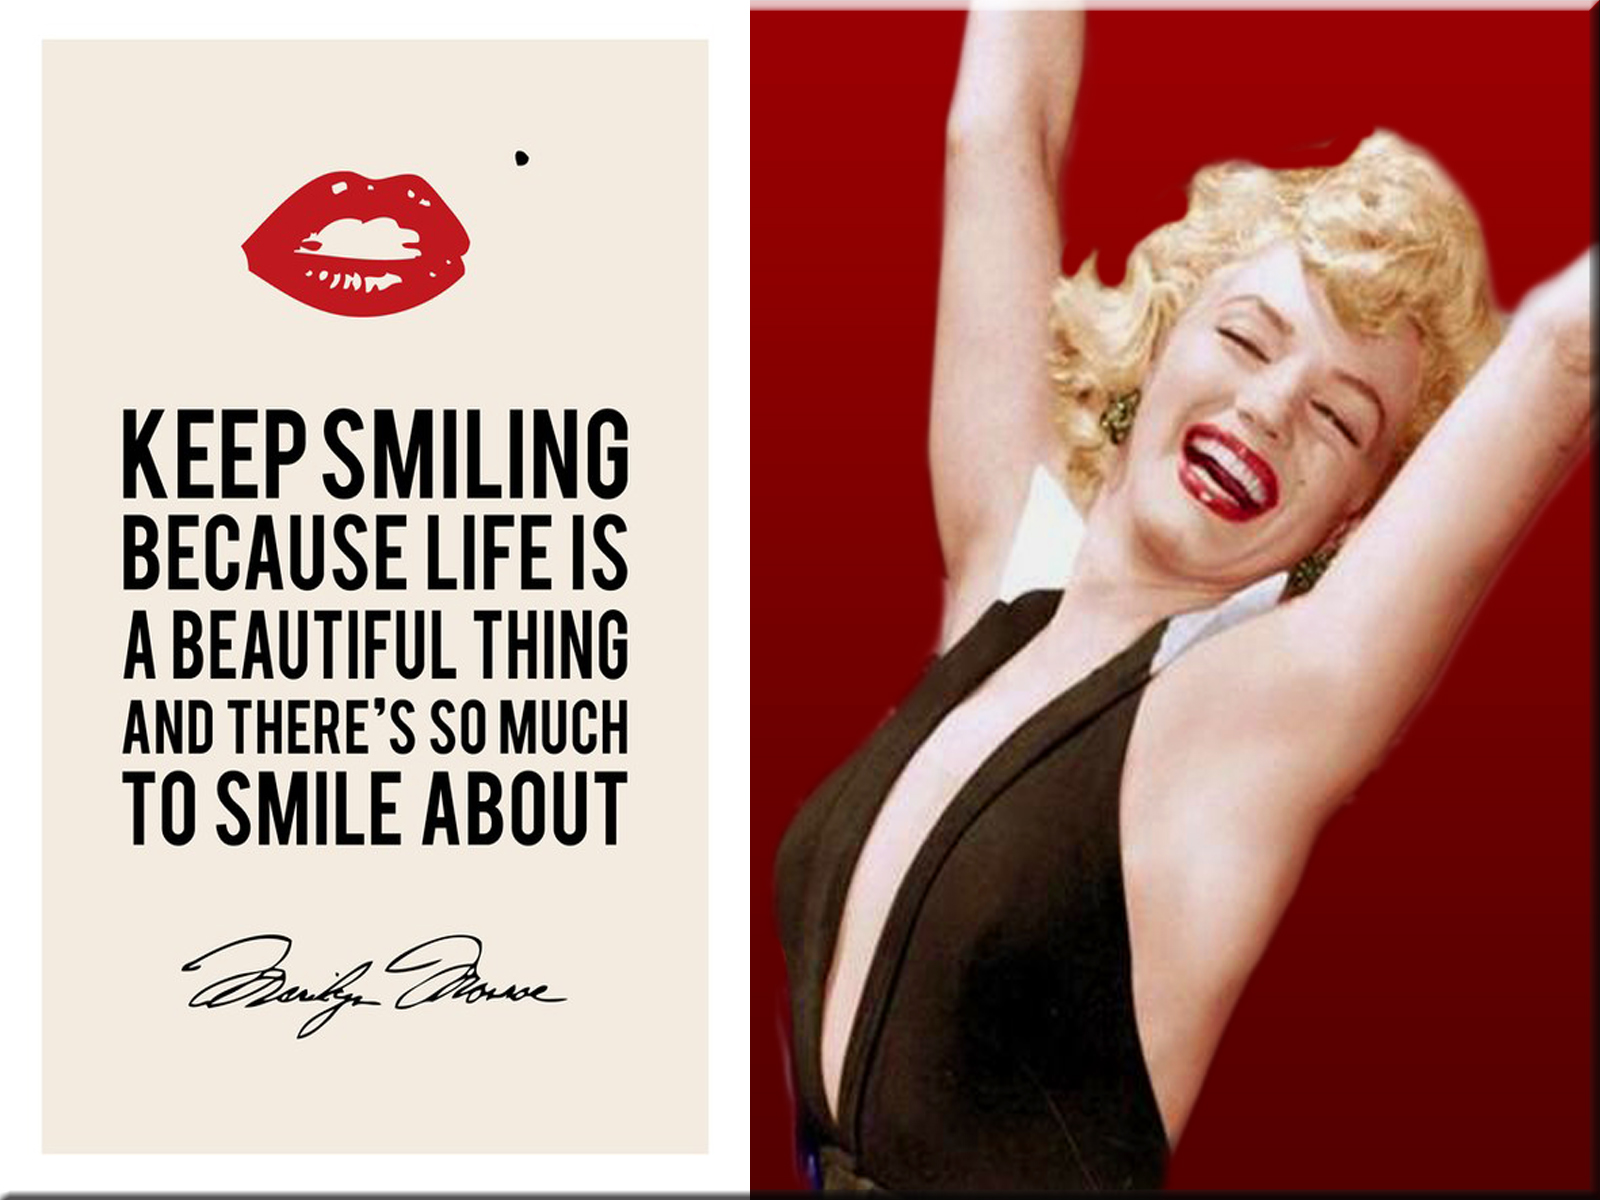 Marilyn Monroe Quotes Free DonwloadImage 2 of 3 HD Backgrounds